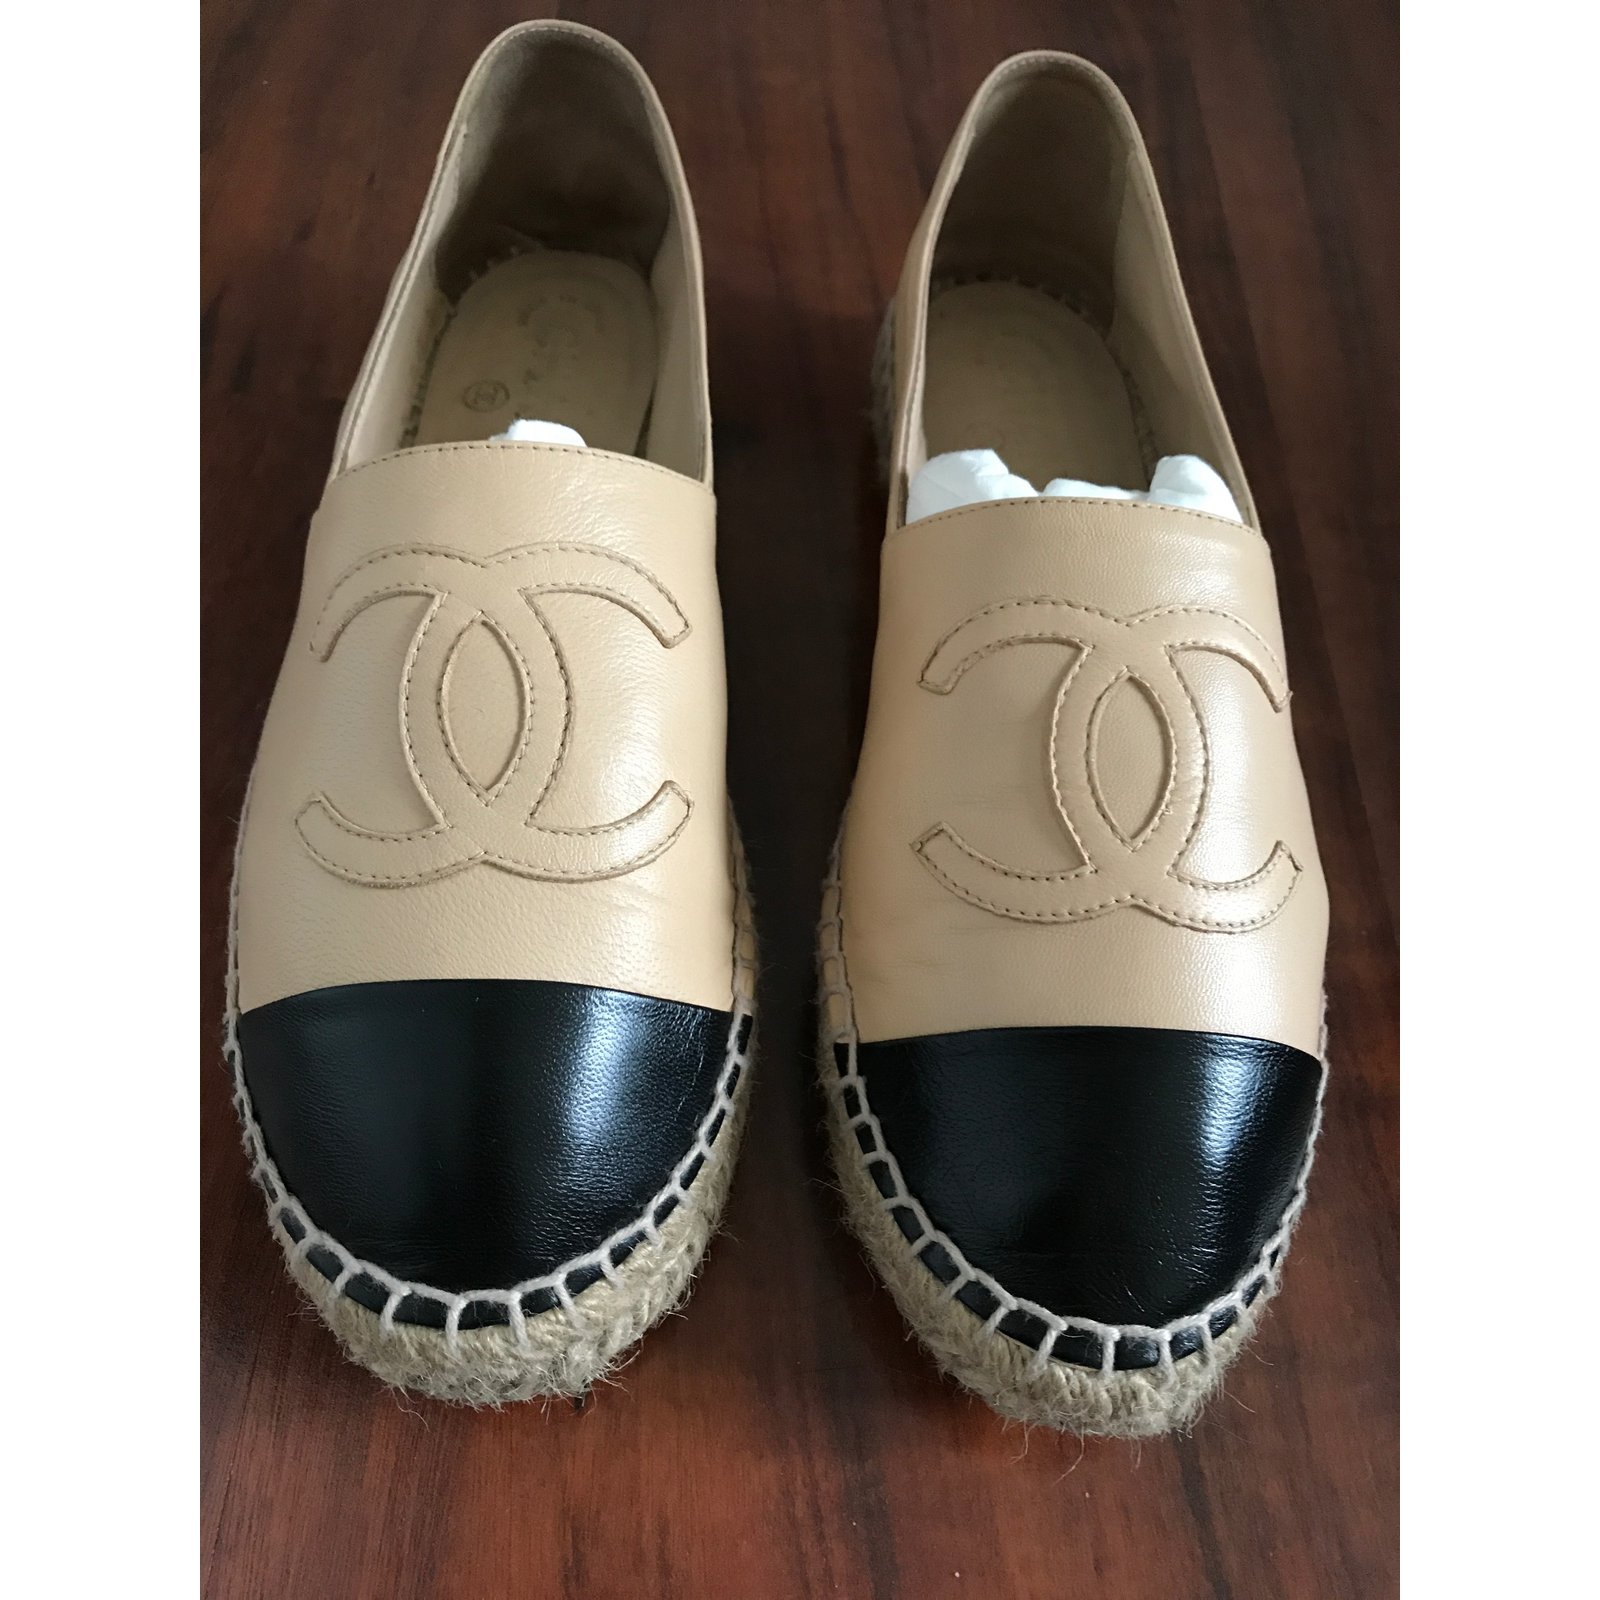 chanel slip on shoes